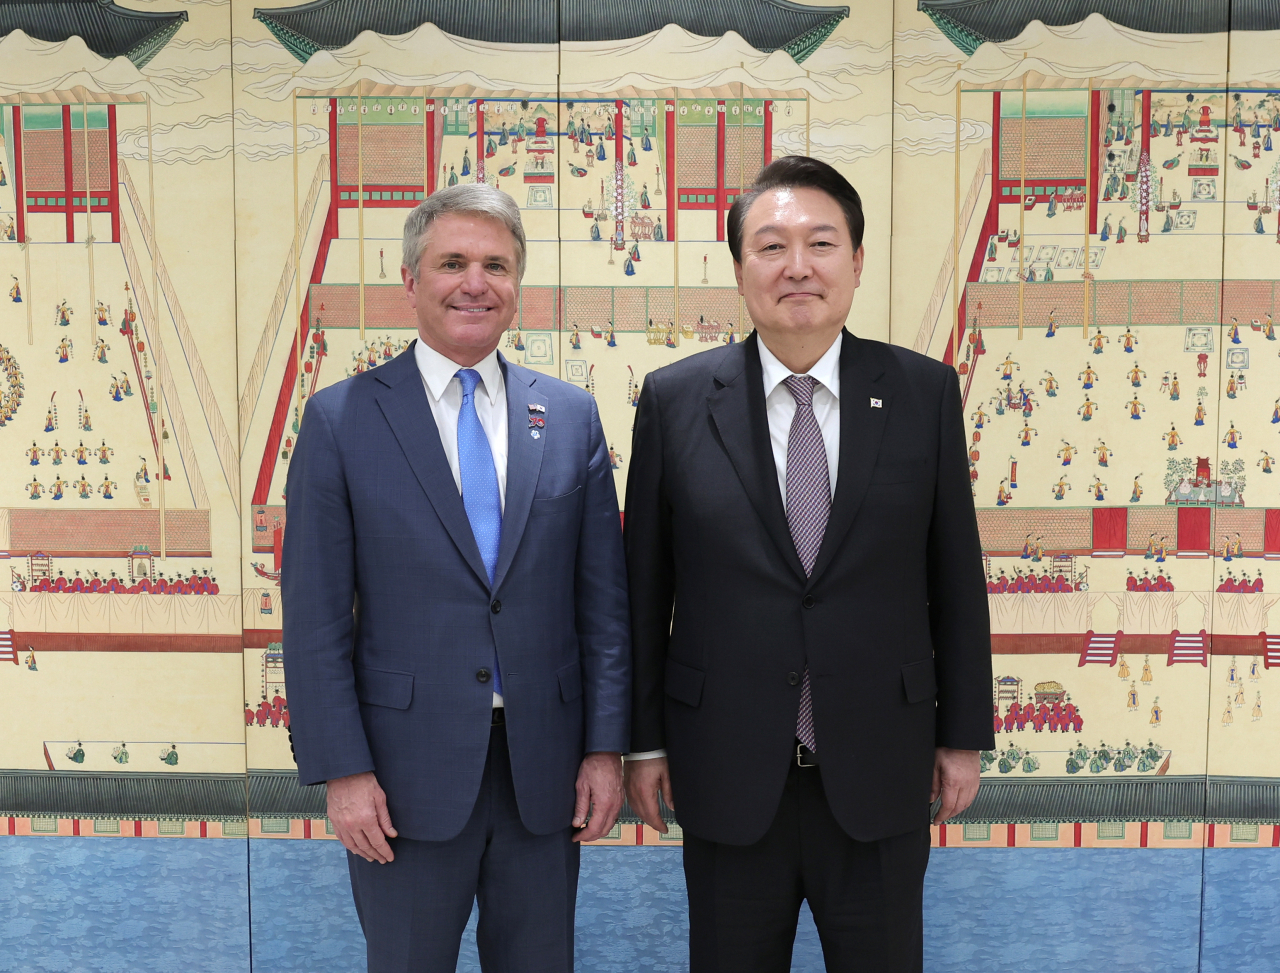 President Yoon Suk Yeol (right) and Rep. Michael McCaul, chair of the Foreign Affairs Committee in the United States House of Representatives, pose for a picture at the presidential office in Yongsan-gu, Seoul, Wednesday. (Yonhap)